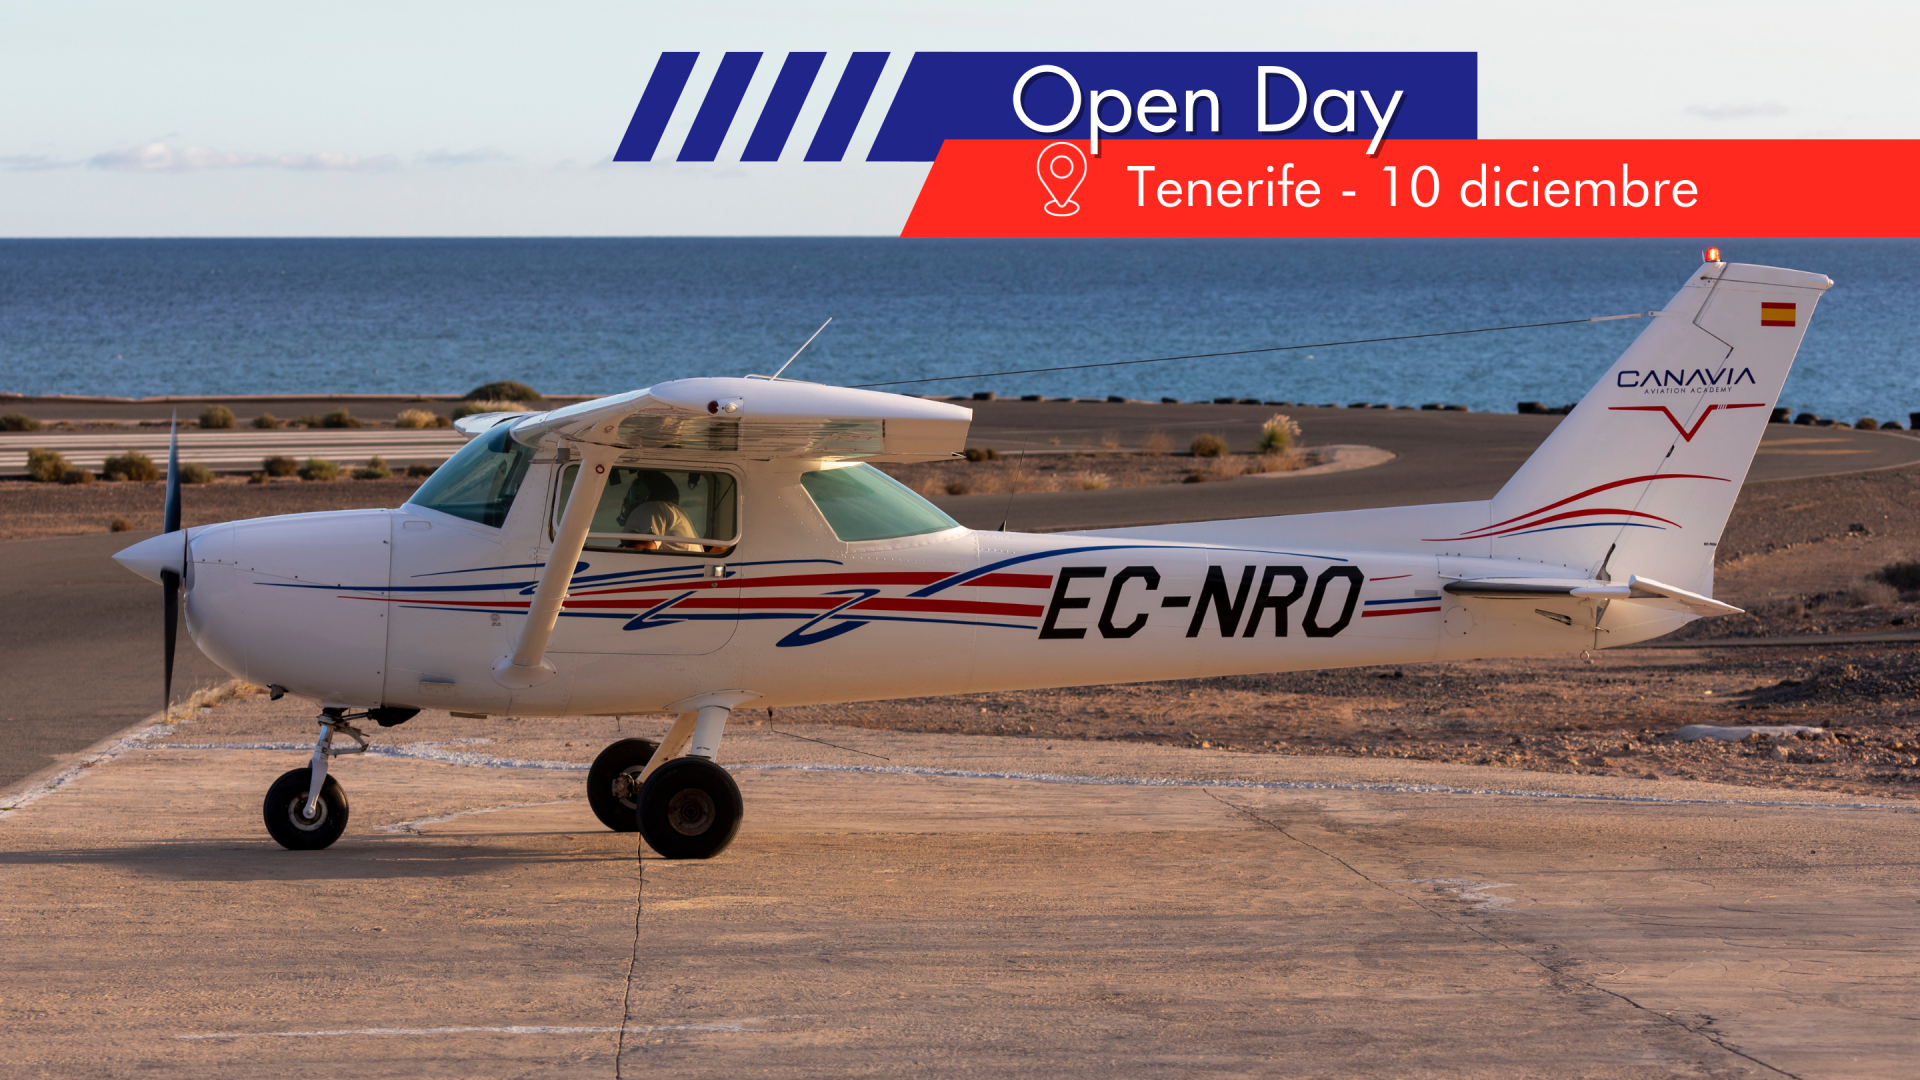 New Open Day in Tenerife - December 10th